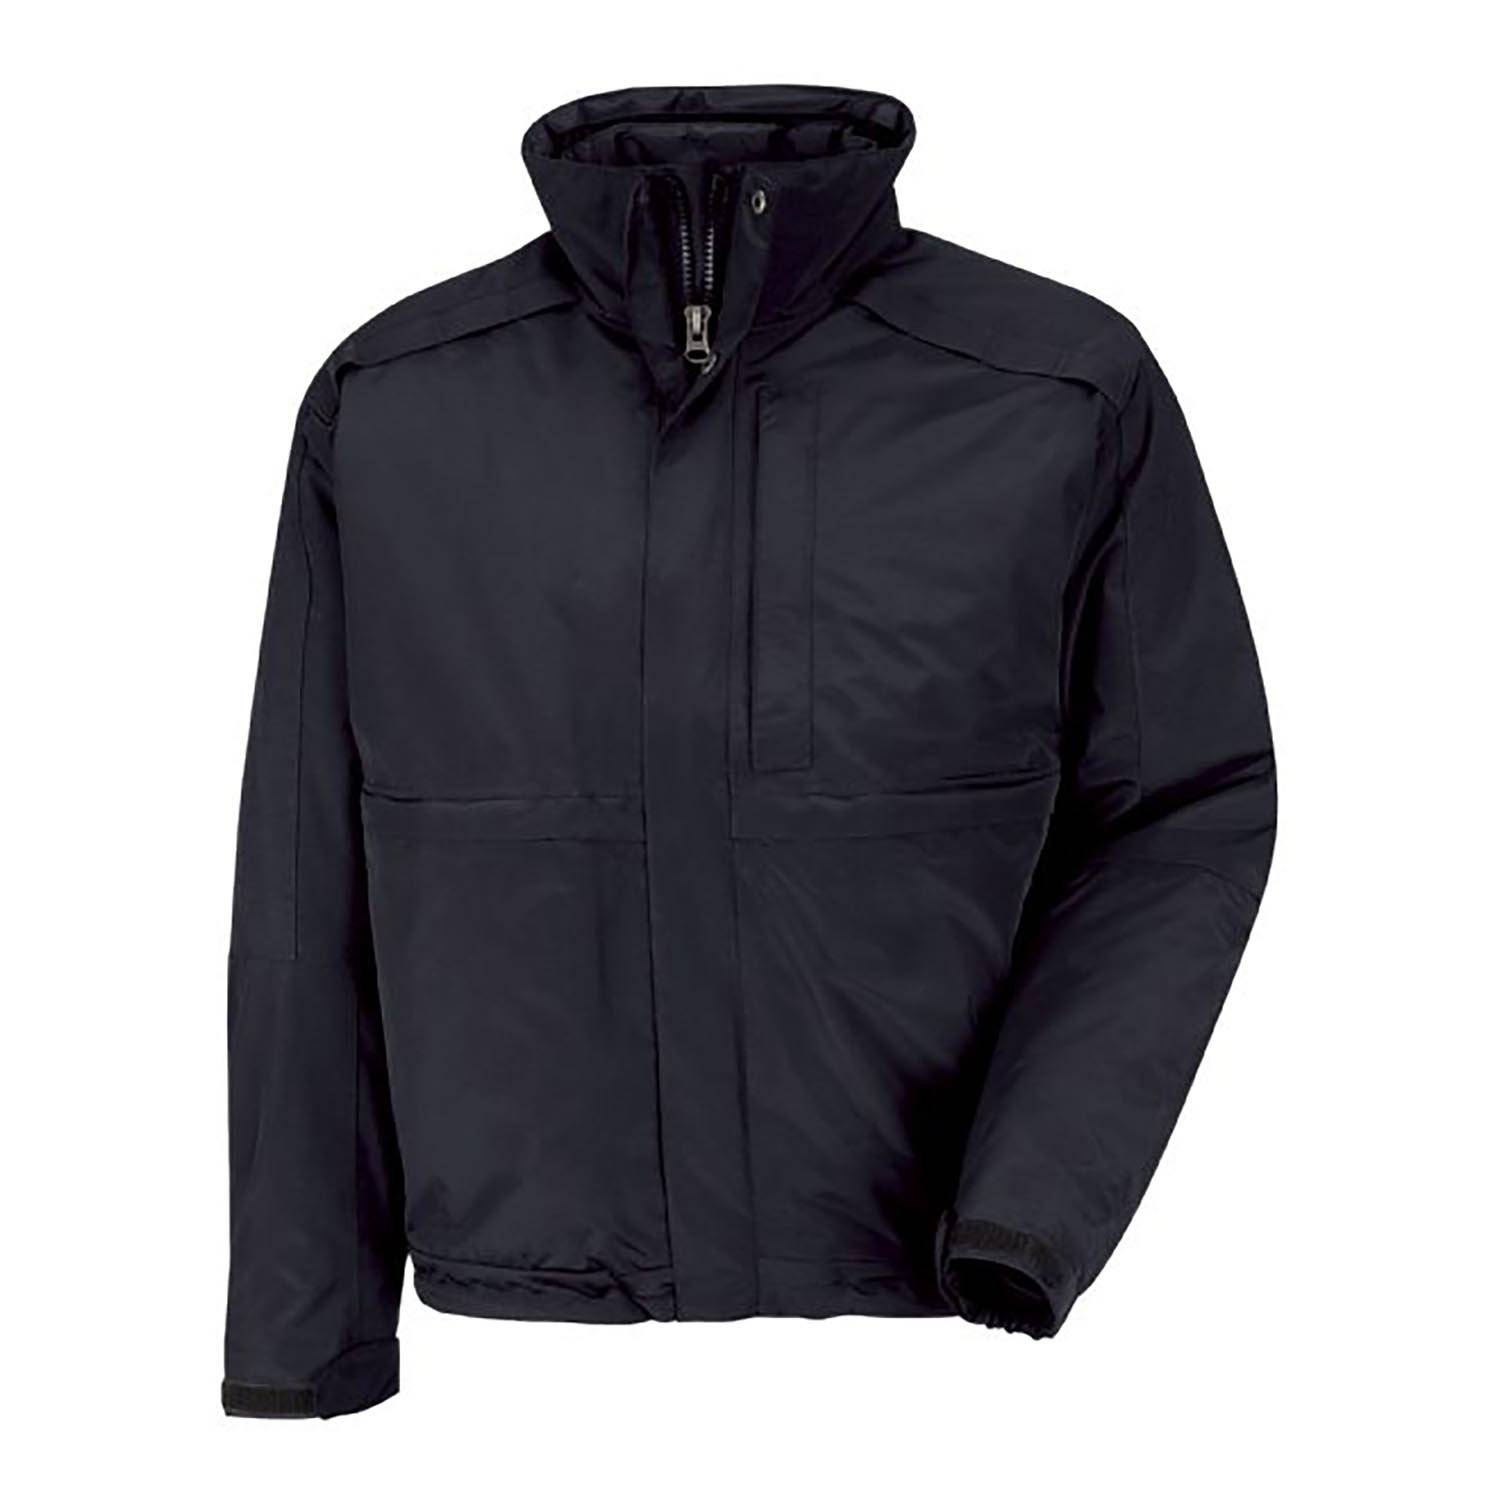 Horace Small 3-N-1 Jacket by North Face